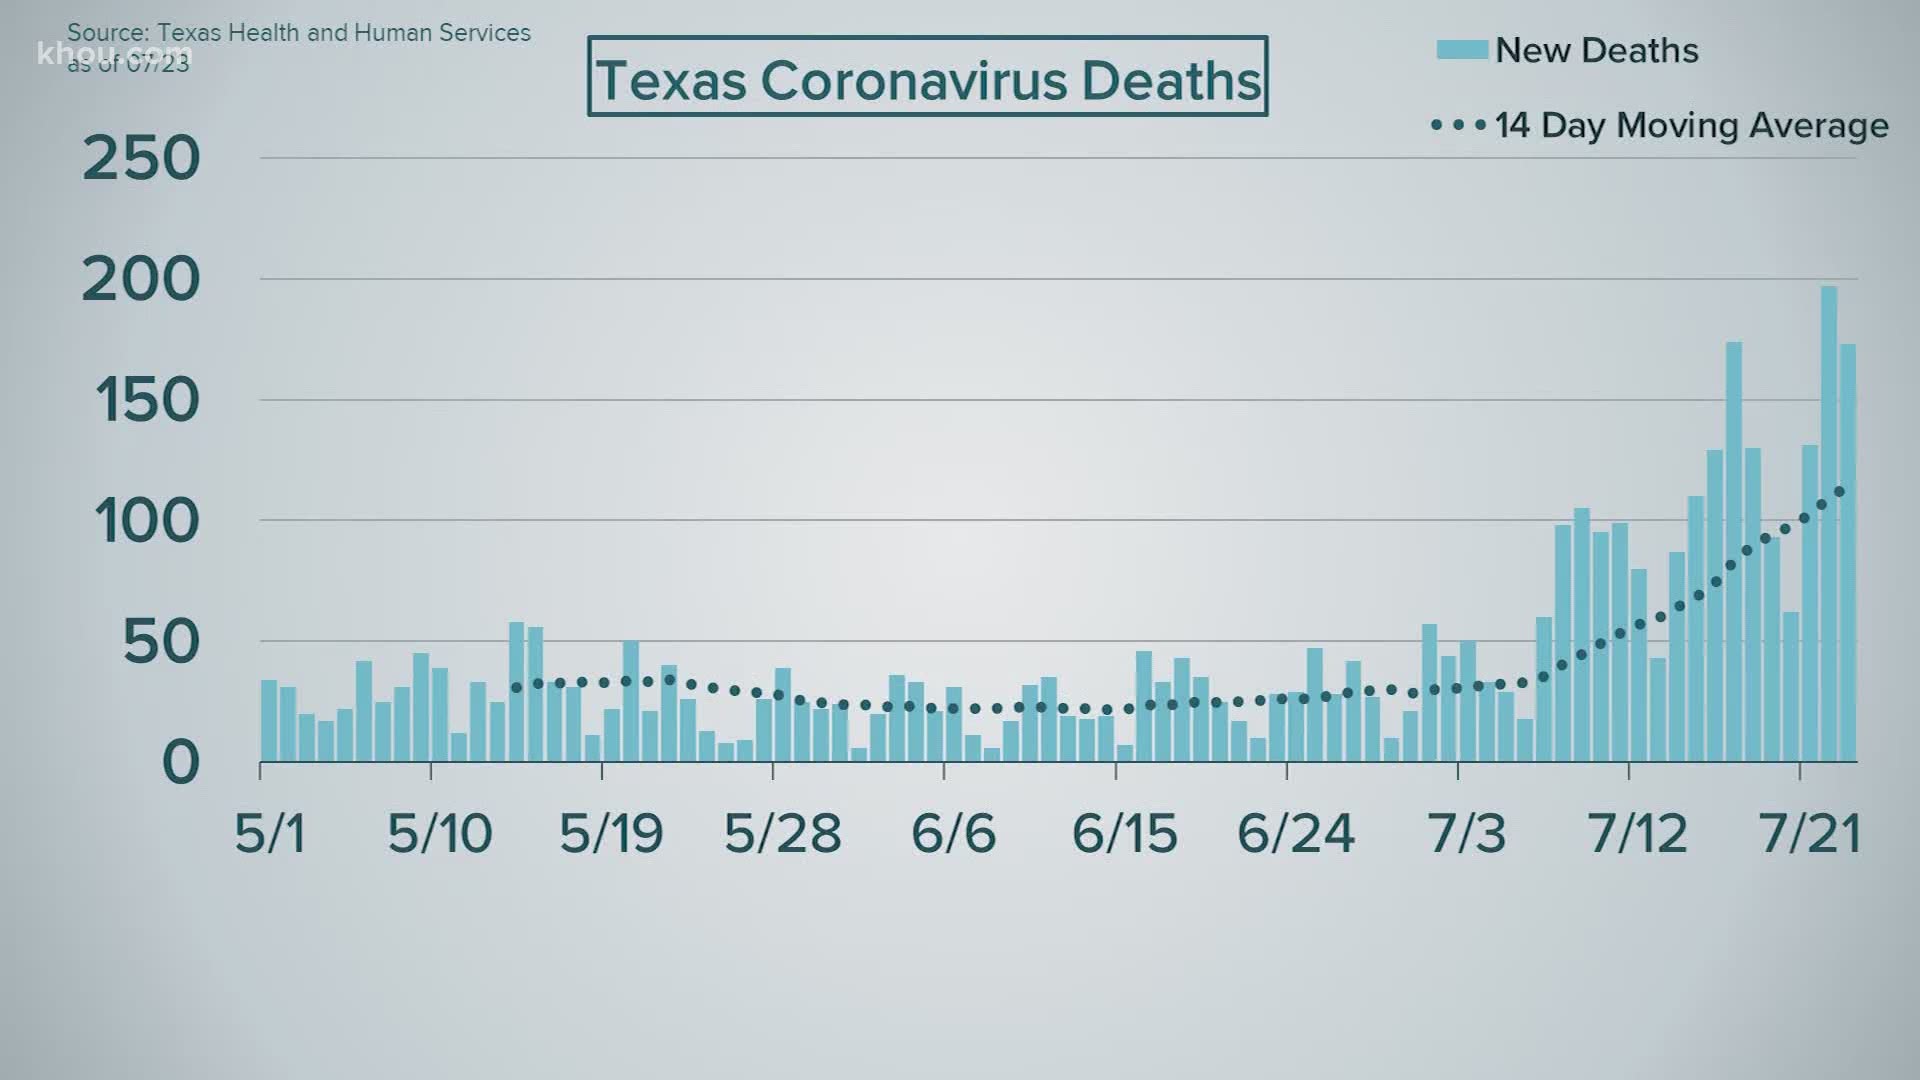 Texas' Department of State Health Services reported 9,507 new COVID-19 cases and 173 new coronavirus deaths on Thursday.